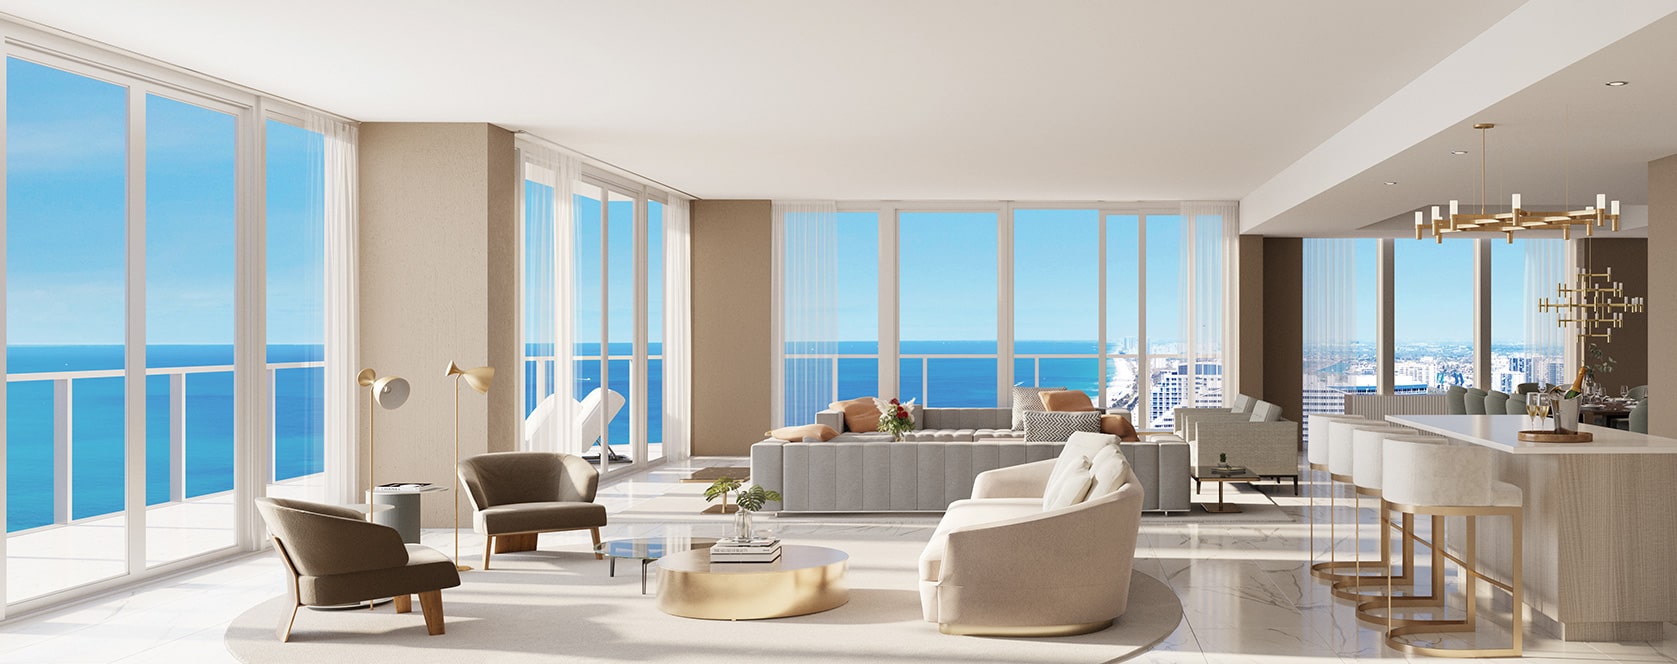 interior rendering of great room in penthouse 1 east